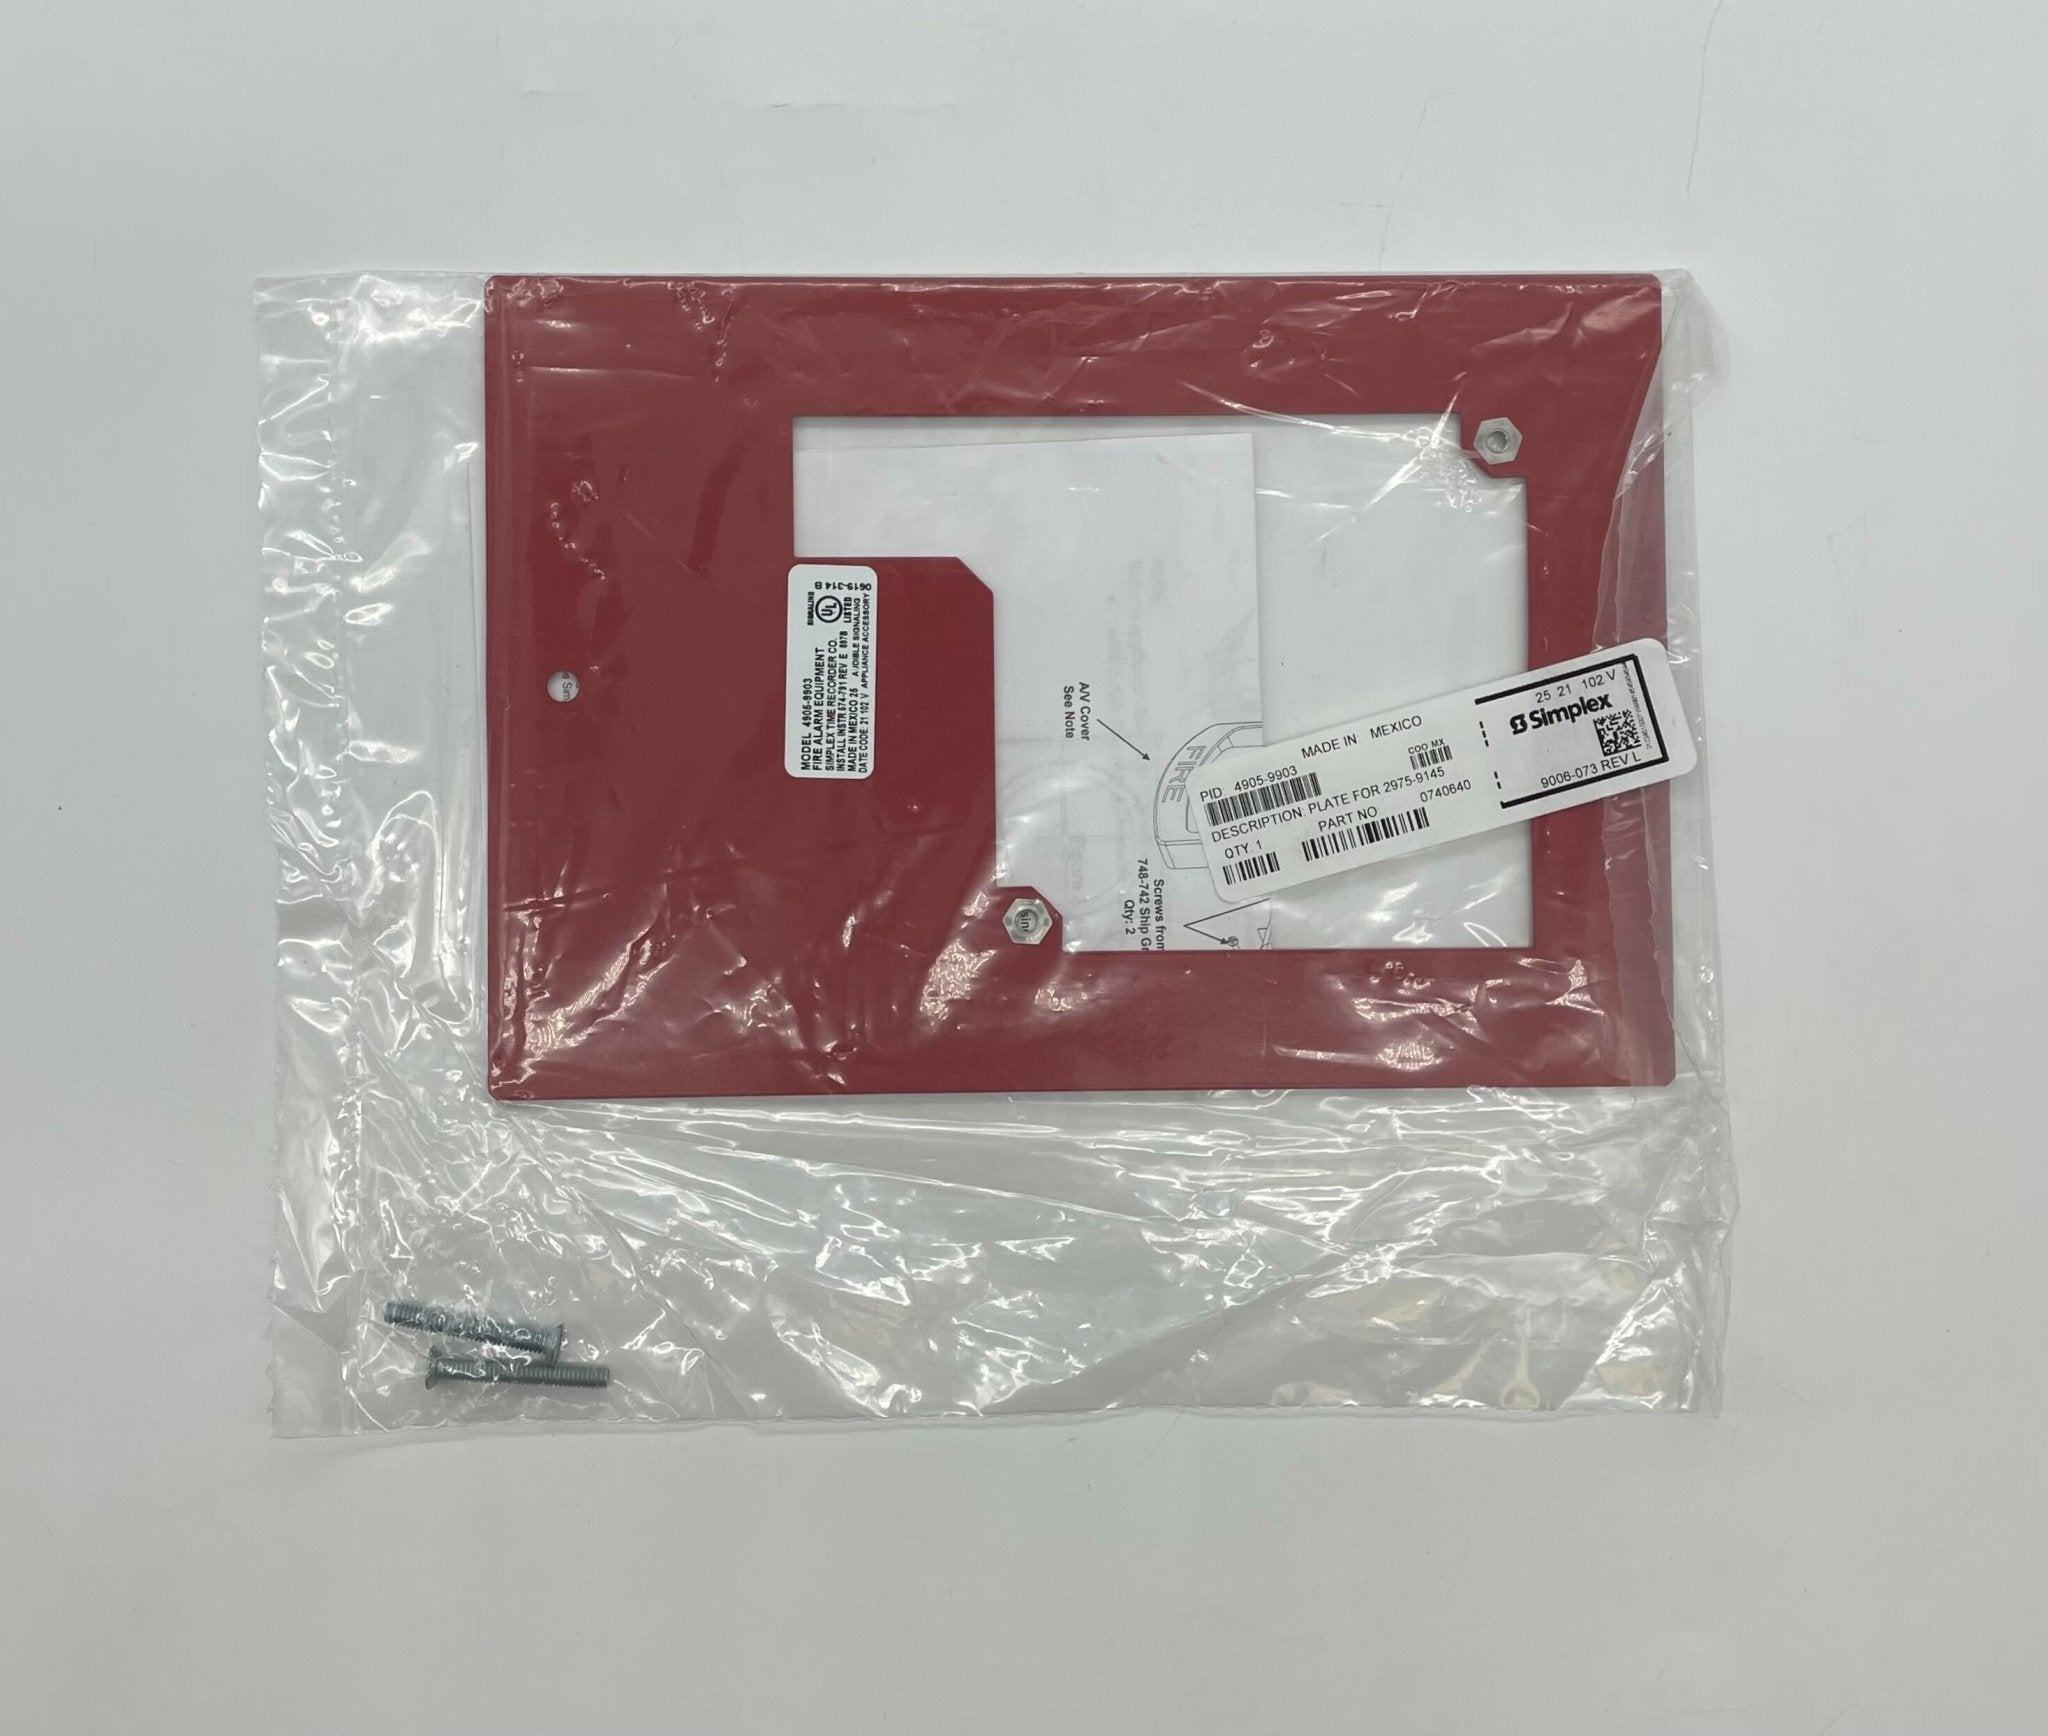 Simplex 4905-9903 Plate For 2975-9145 - The Fire Alarm Supplier